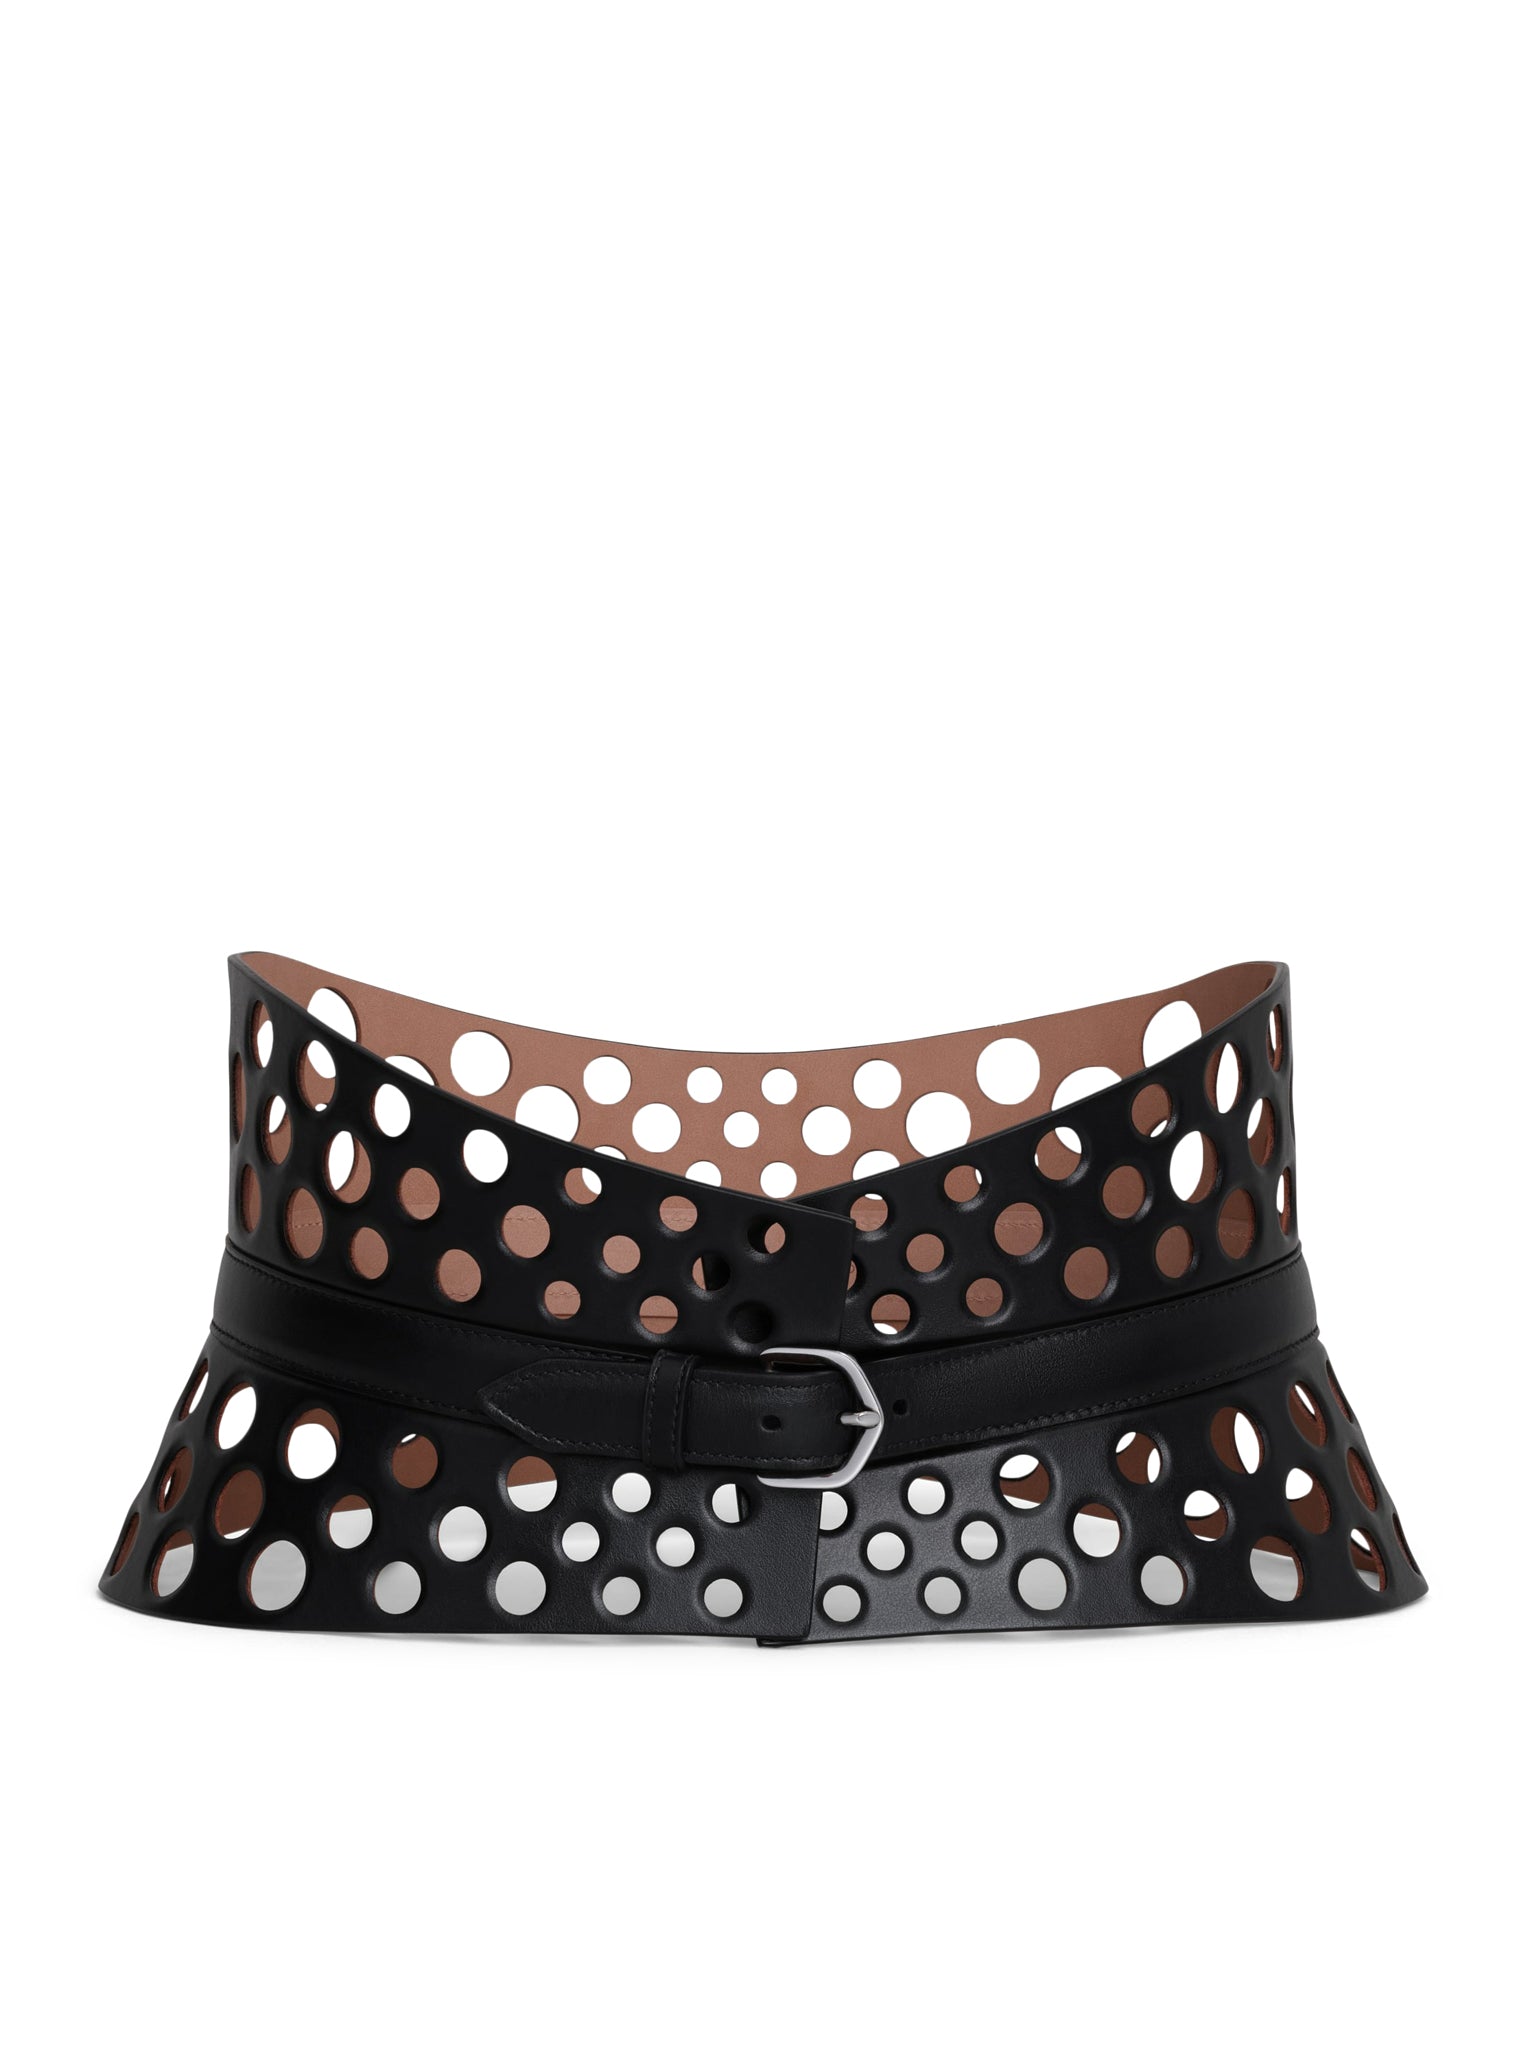 NEO BUSTIER BELT IN PERFORATED CALF LEATHER